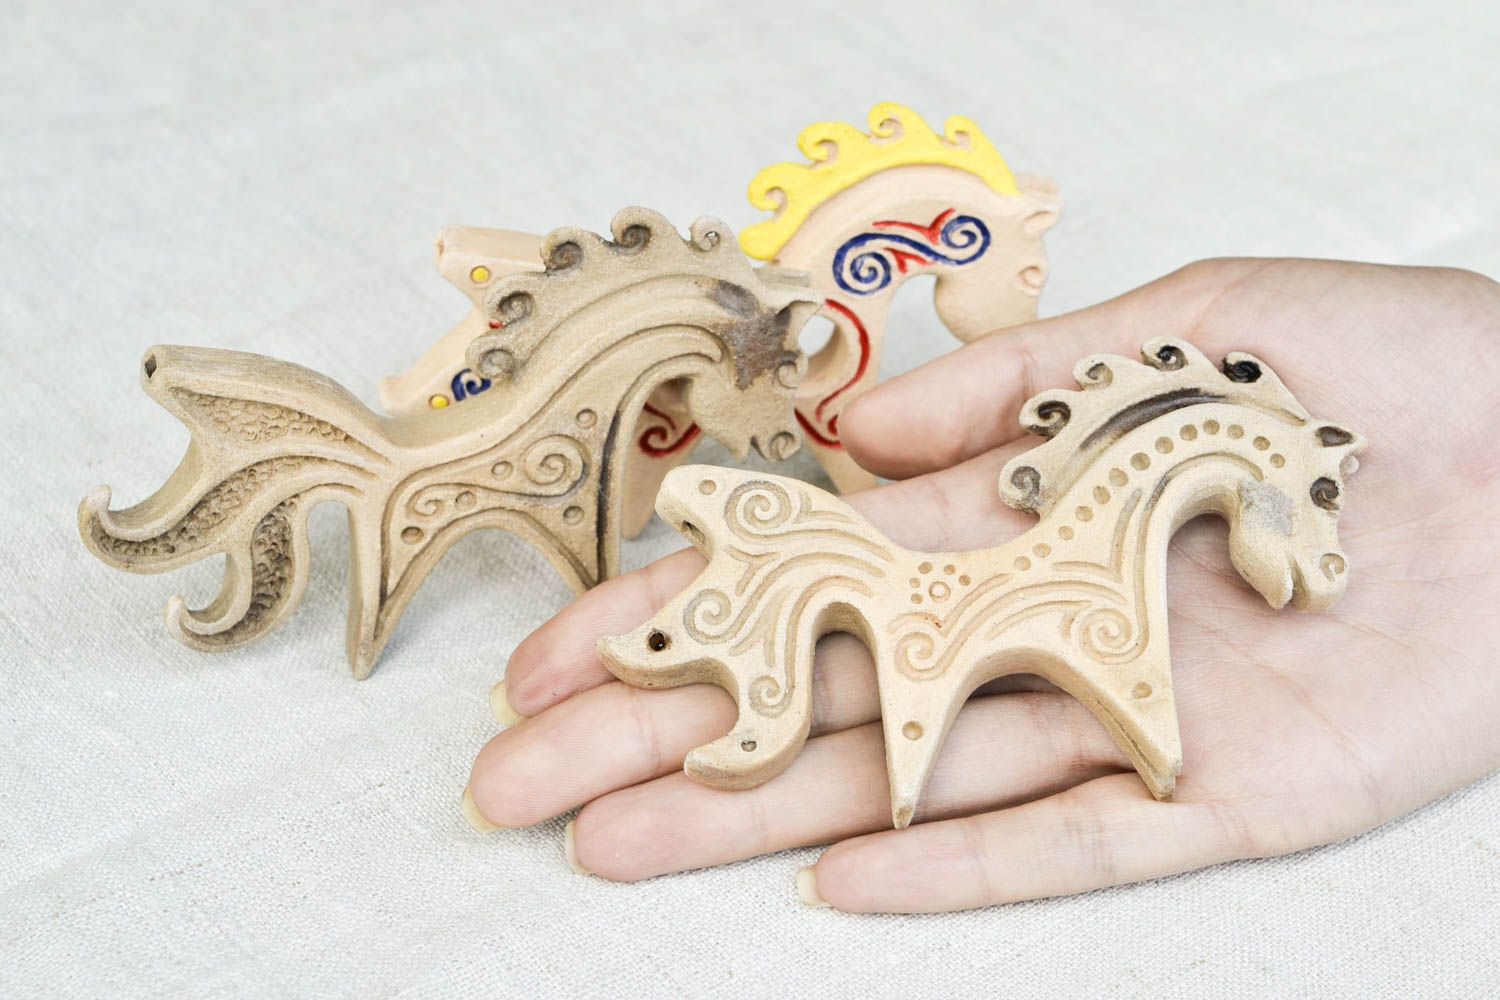 Handmade designer penny whistles toys in ethnic style 3 unusual clay toys photo 2